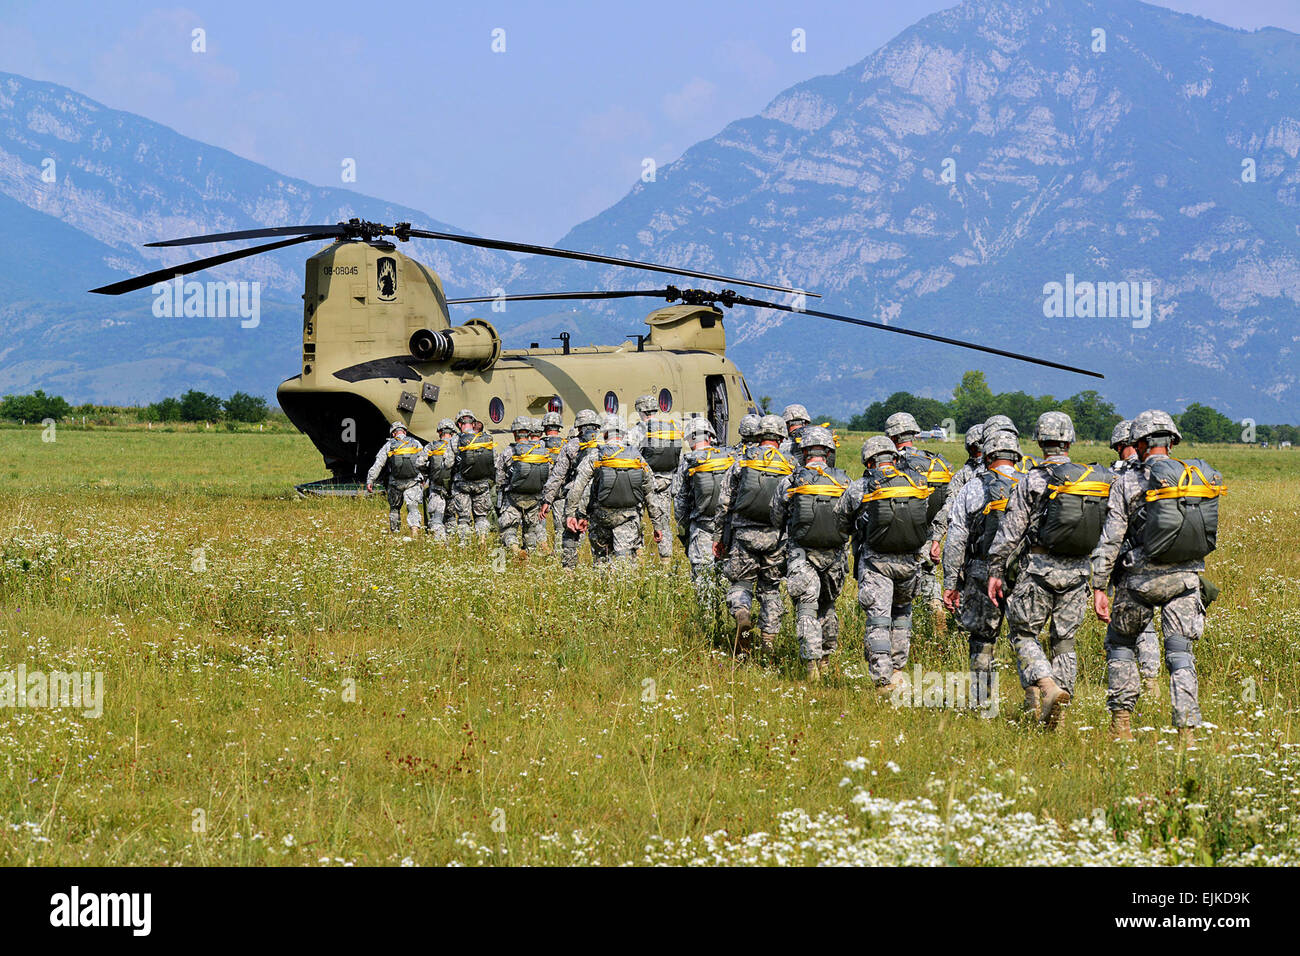 U.S. Army paratroopers load up into a CH-47 Chinook helicopter before a joint parachute training jump near the city of Pordenone in northeast Italy, July 16, 2013. Paratroopers from the 173rd Airborne Brigade Combat Team participated in a joint parachute training jump with CH-47 Chinook aircraft from the 12th Combat Aviation Brigade.  Barbara Romano Stock Photo